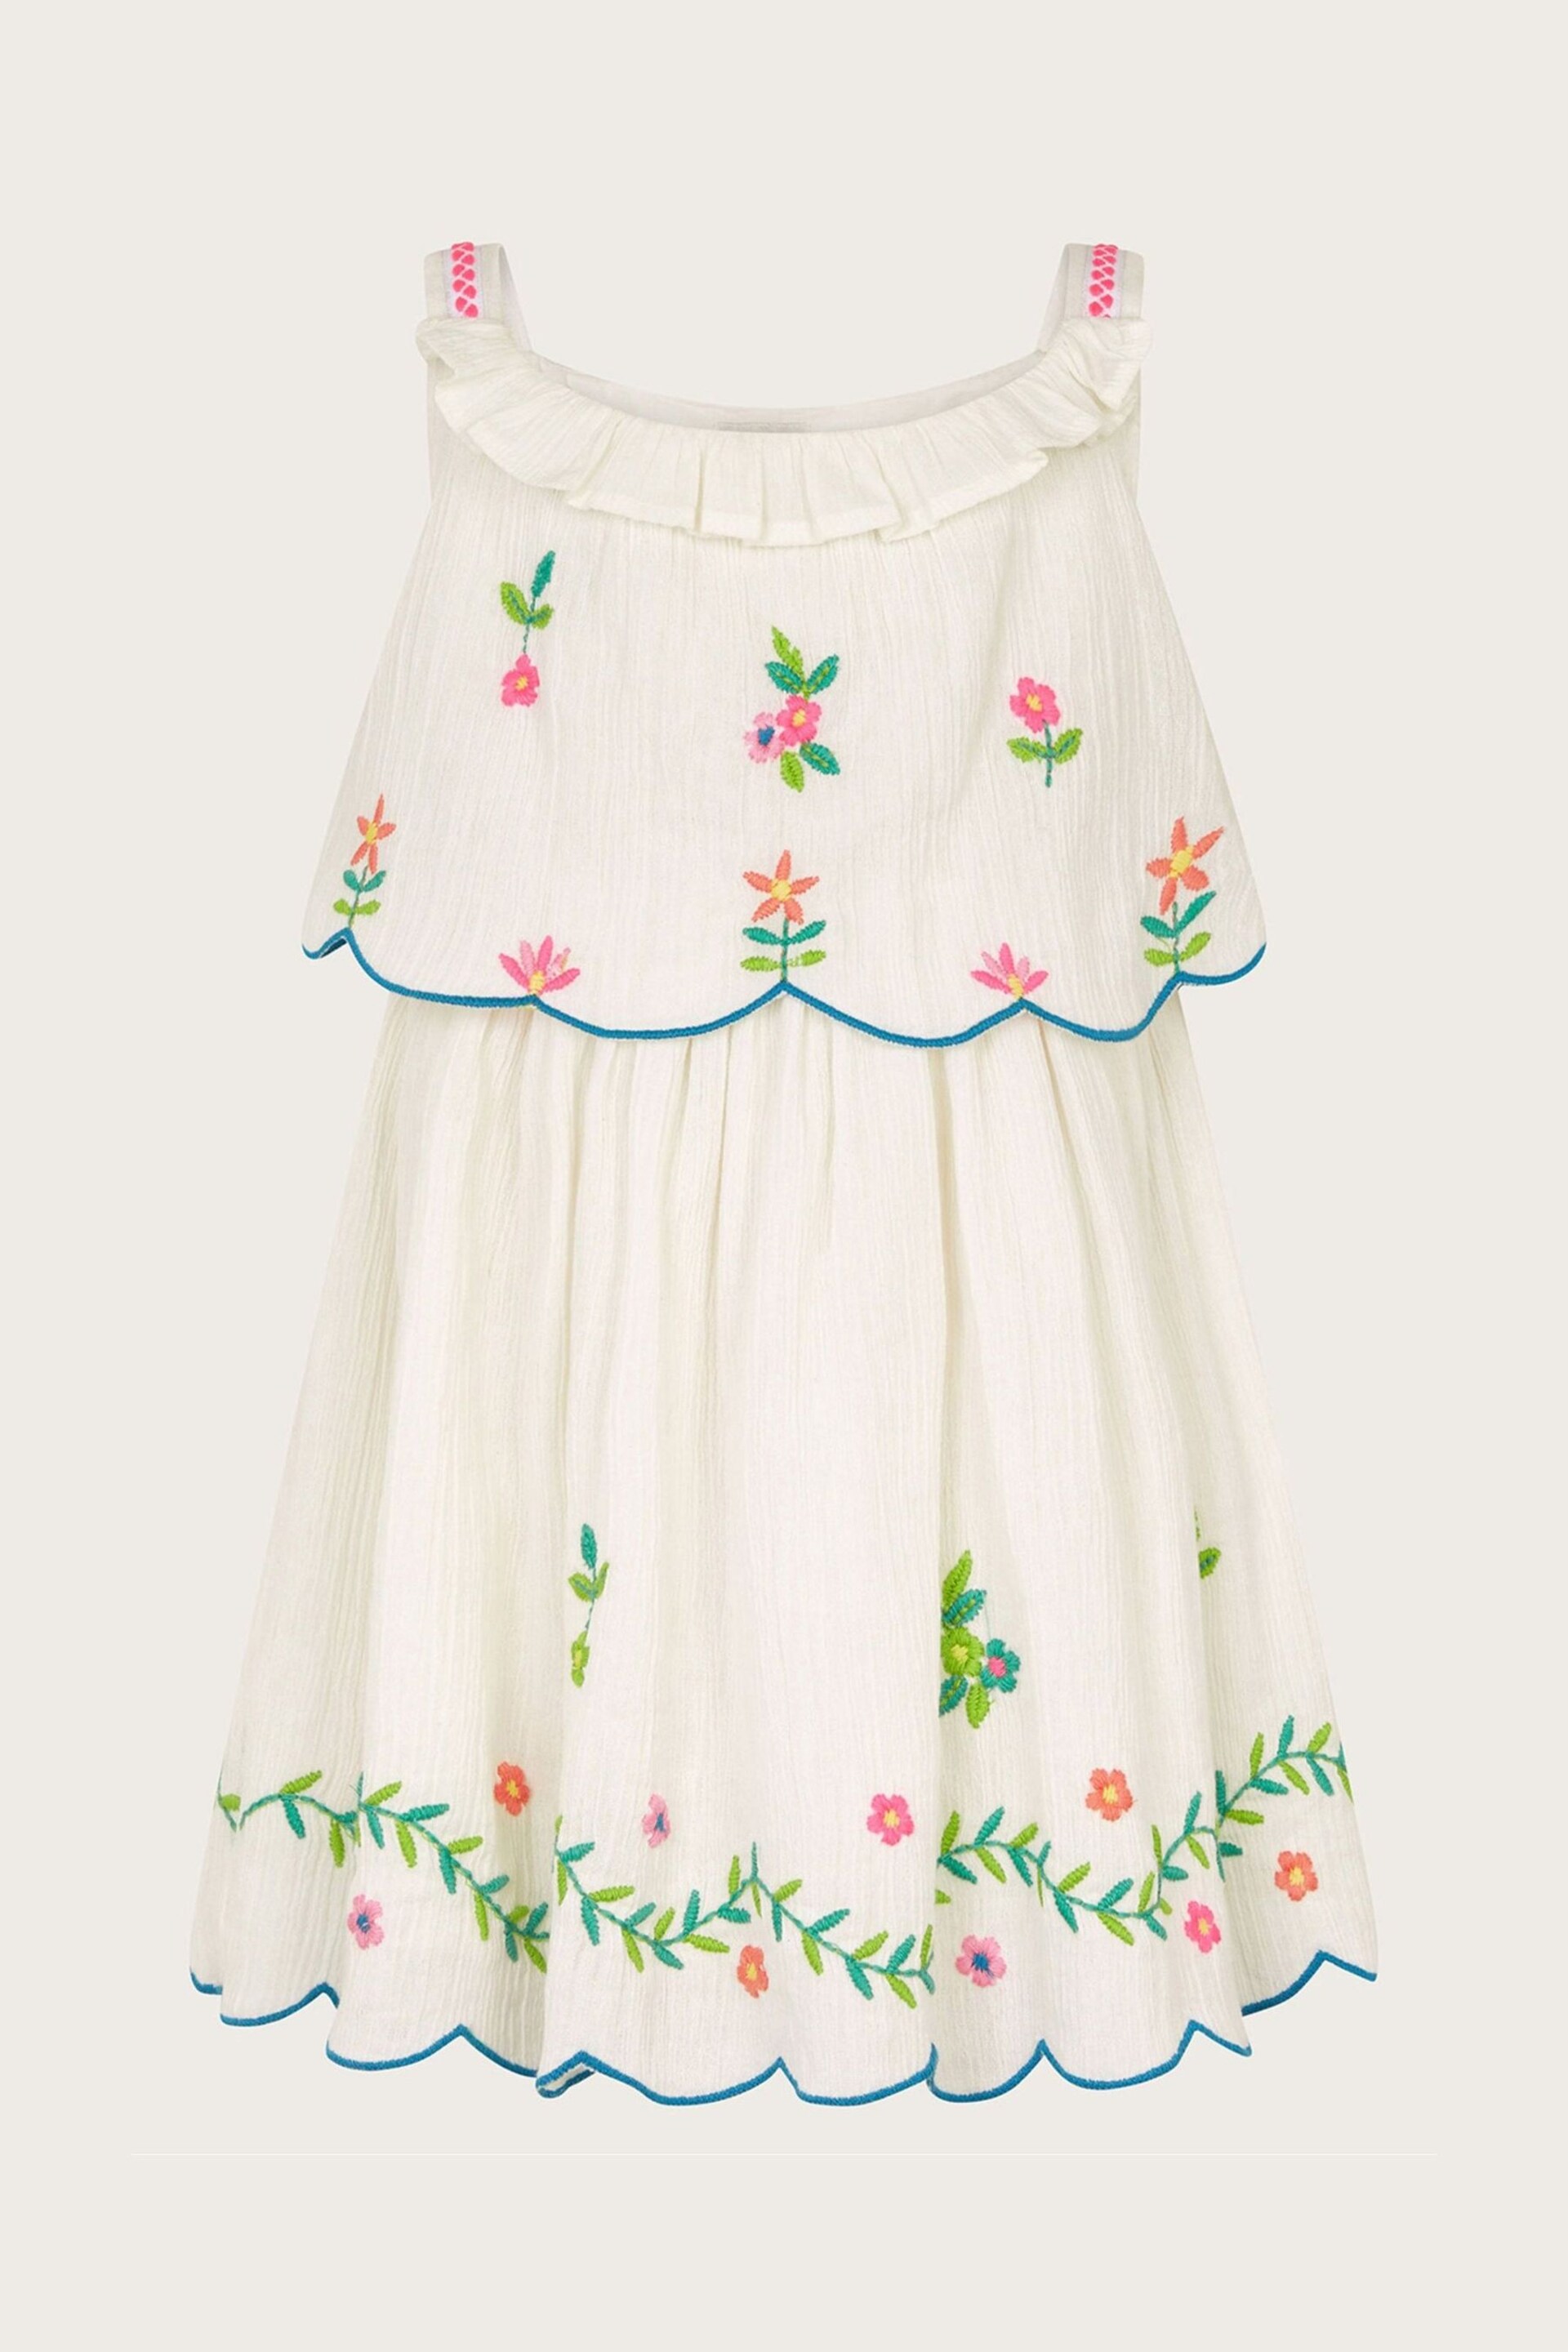 Monsoon White Floral Embroidered Baby Dress - Image 1 of 2